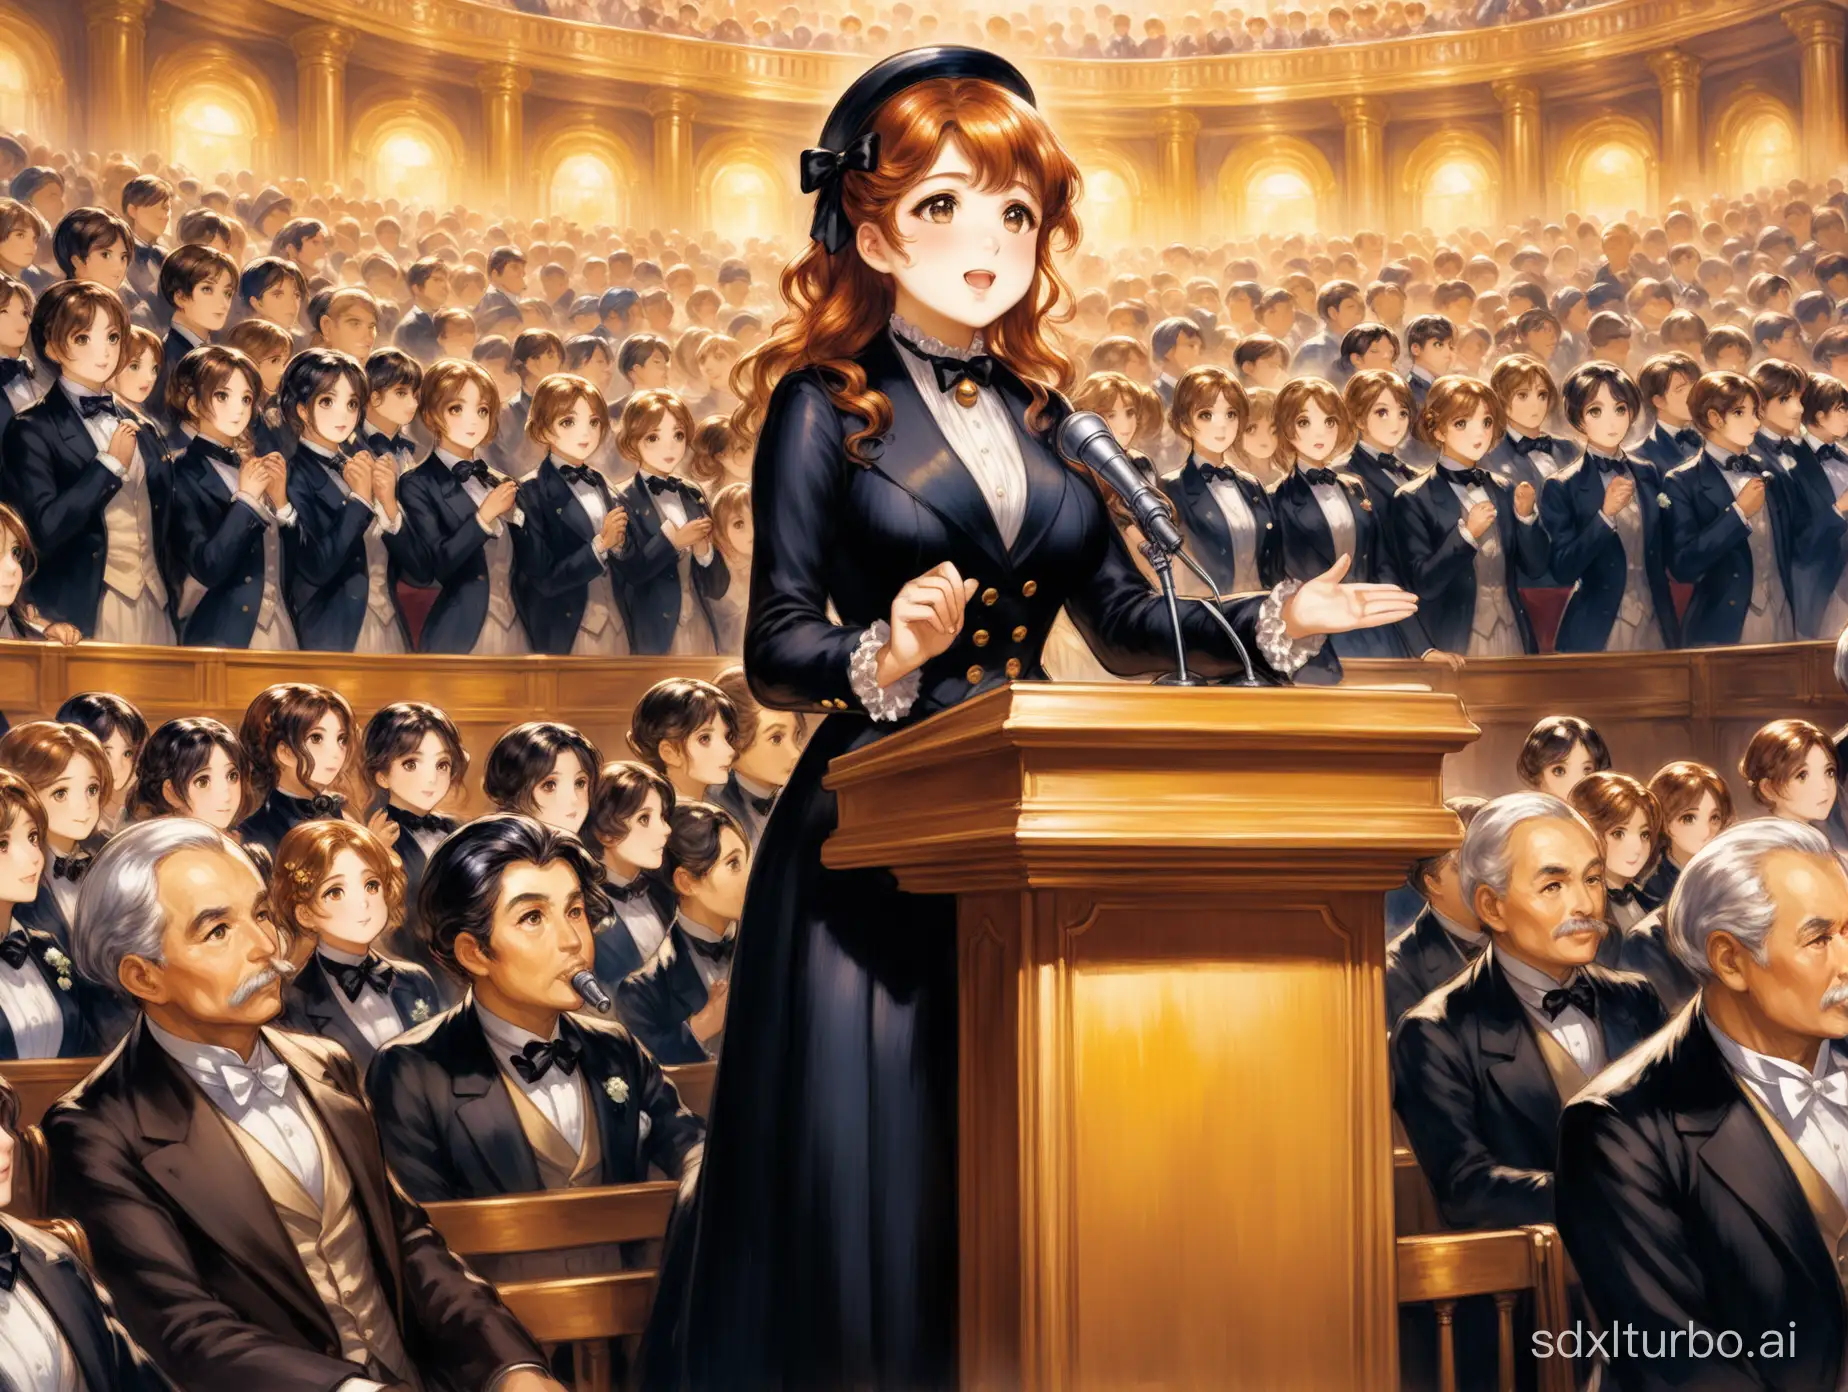 anime style majestic oil panting by auguste renoir, bell epoque period, lot of people watching as one girl wearing a suit on the podium makes a speech about the future of the country, one hand below the podium, anime style